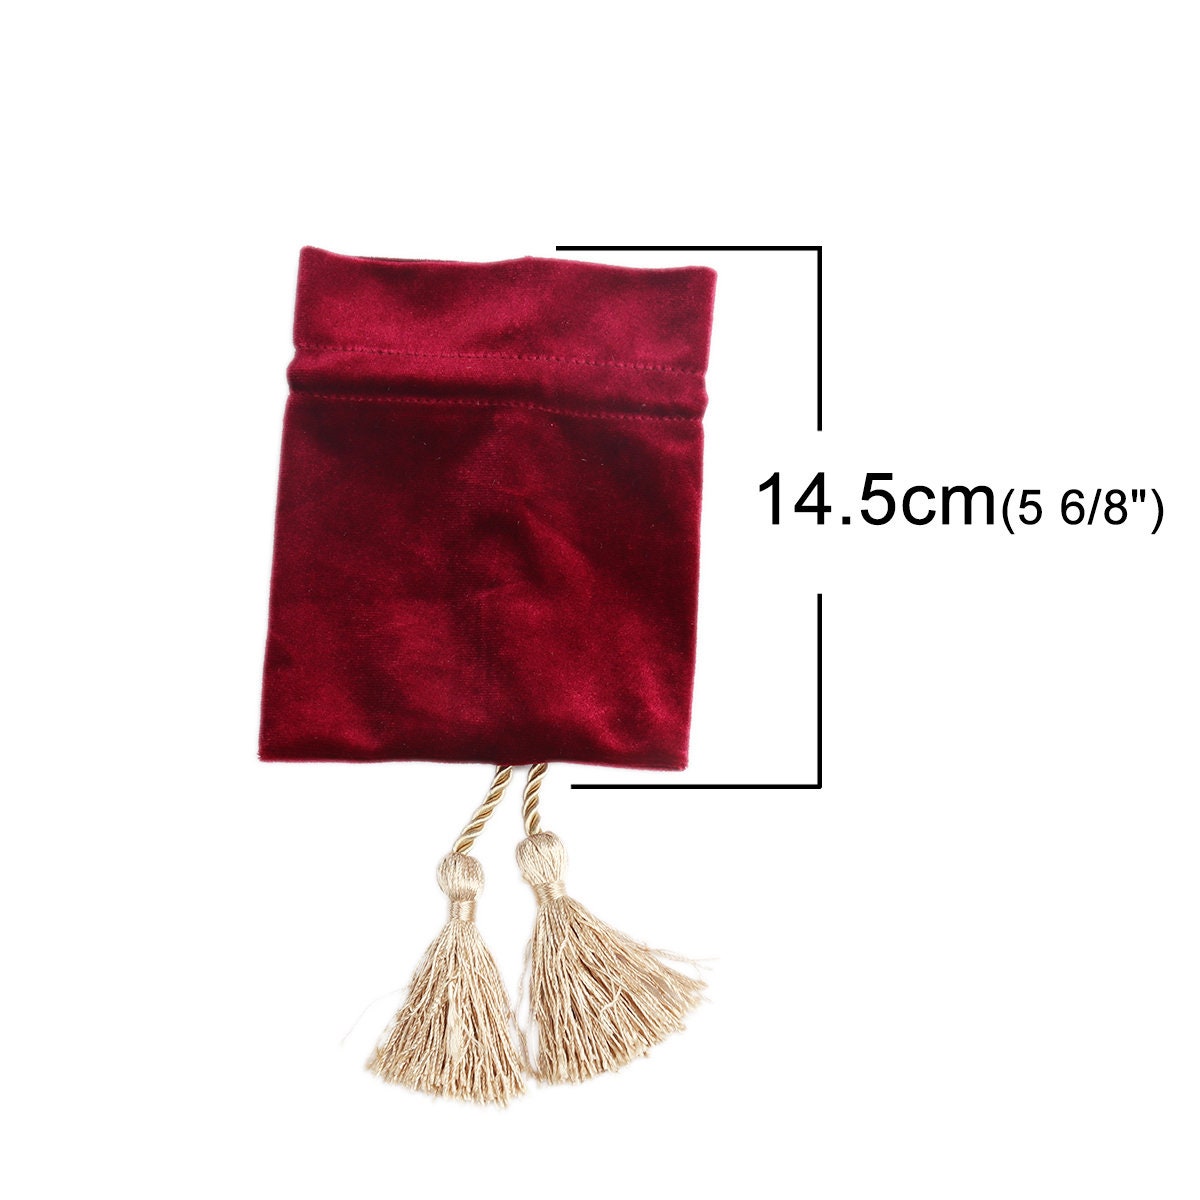 Velvet pouch bag with tassel rope - Choose your color - Witchcraft supplies, dice bag, gift wrap, favour bag